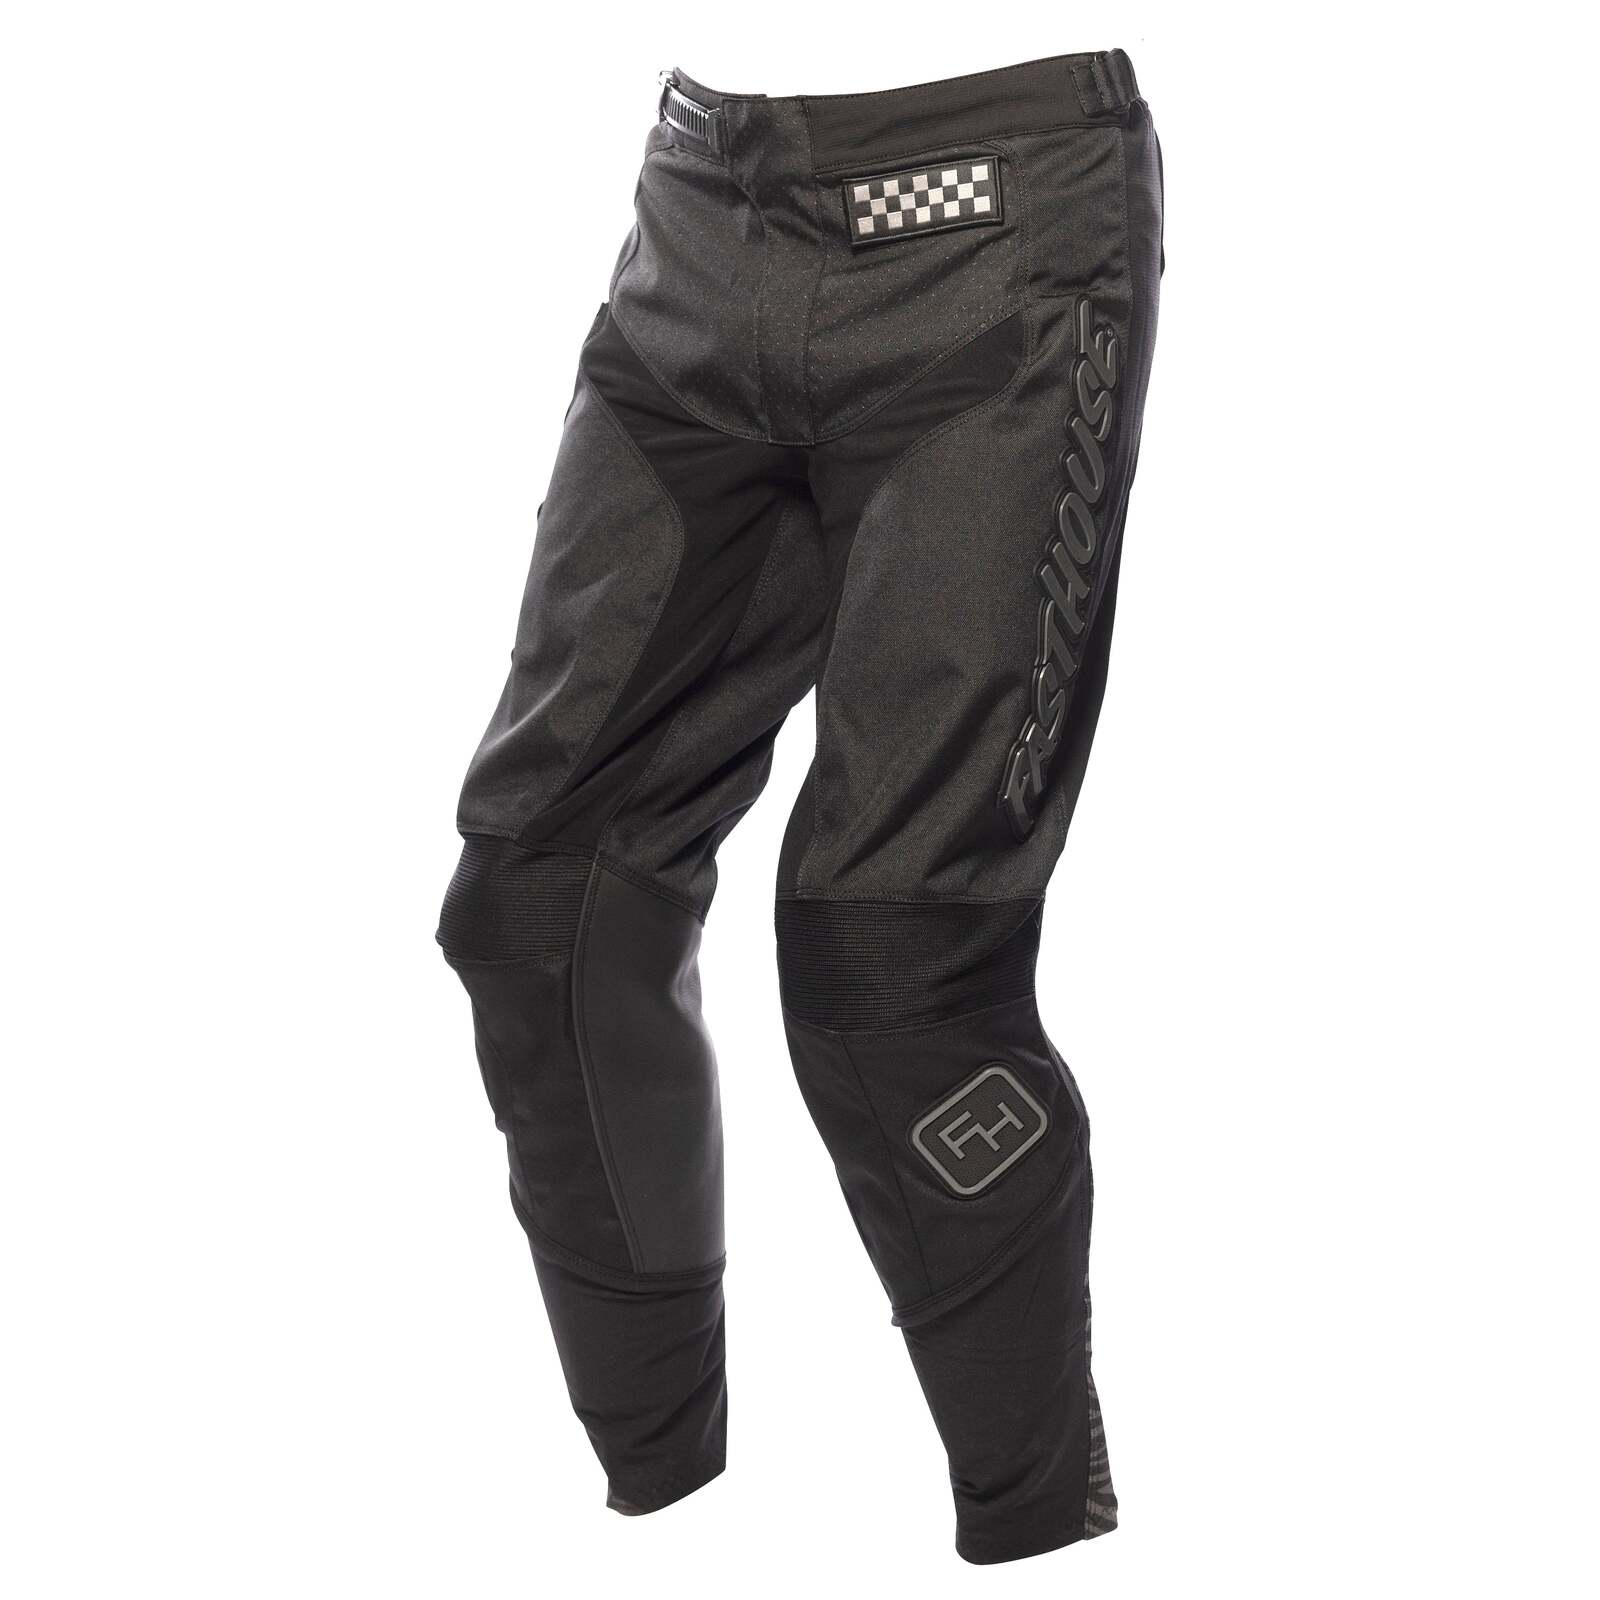 Fasthouse Grindhouse Pants - Black/Zebra - FASTHOUSE